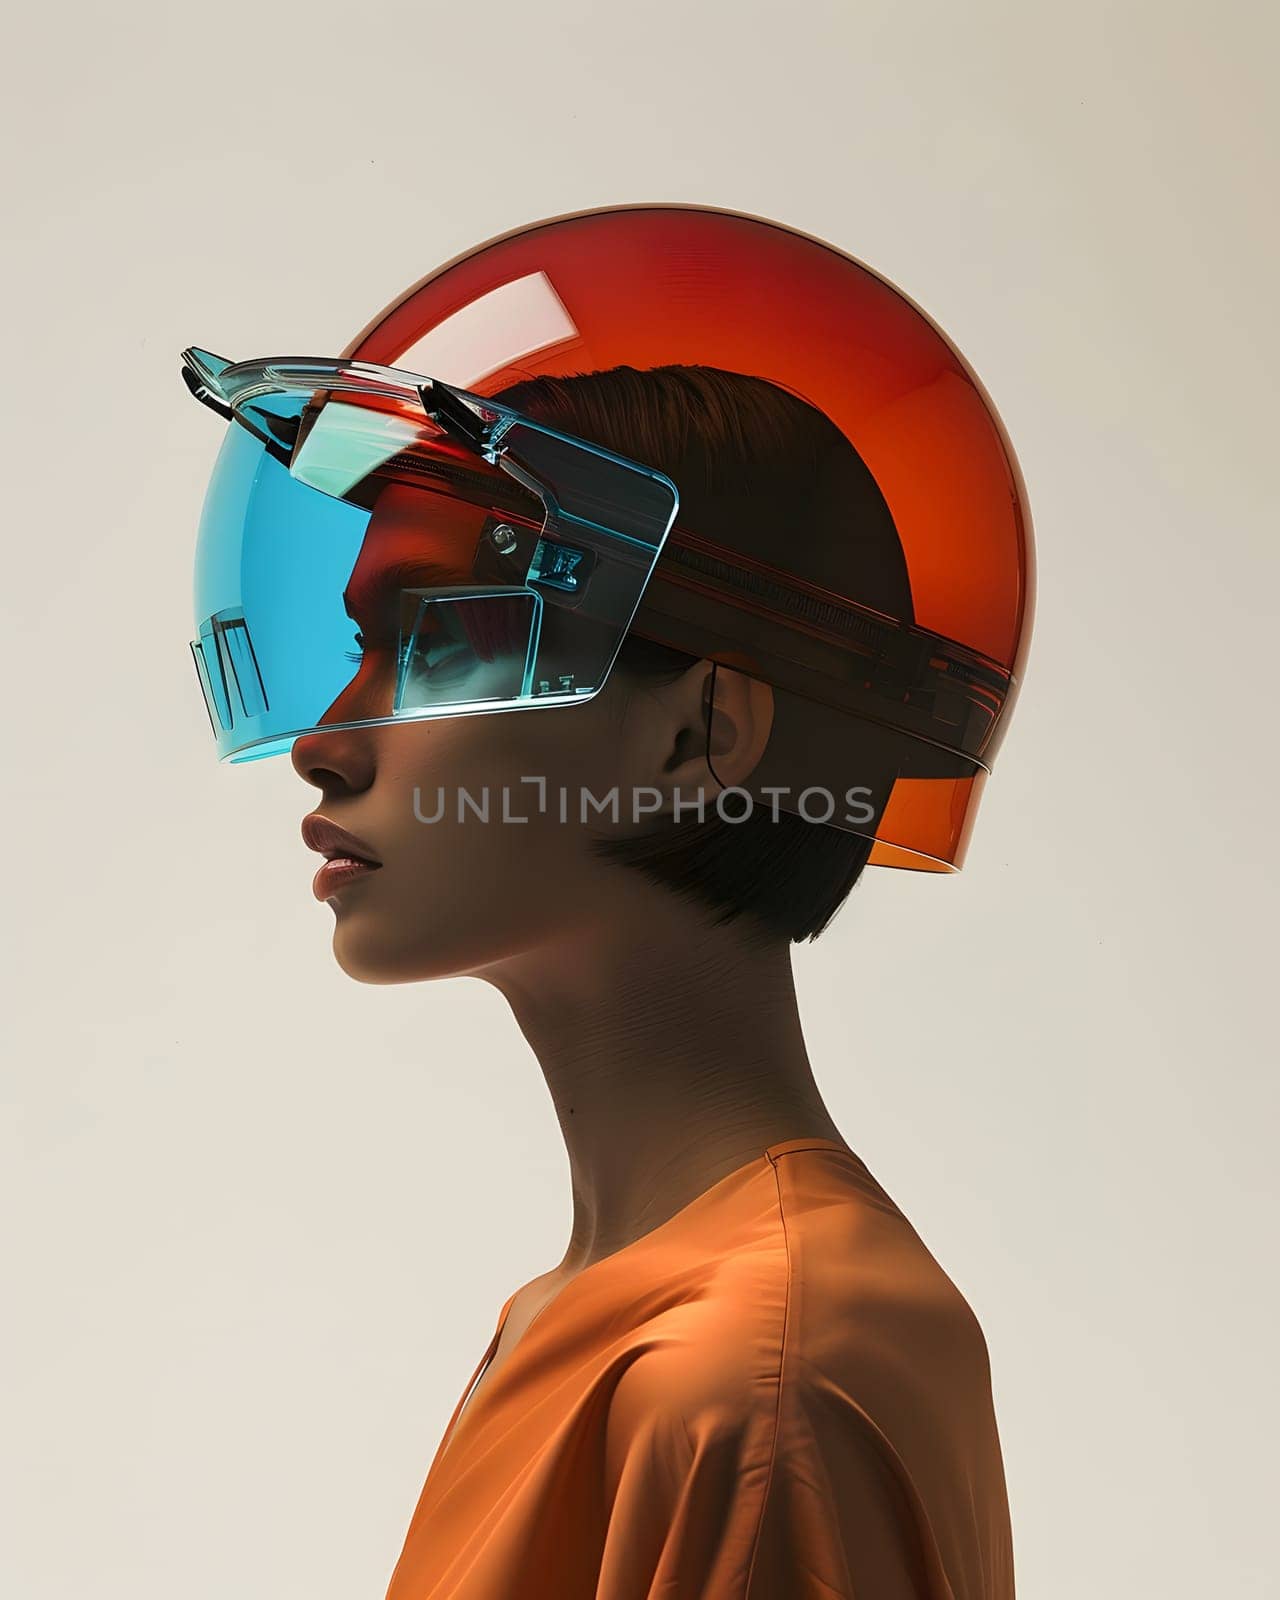 Woman in sports gear with red helmet and blue goggles for vision protection by Nadtochiy